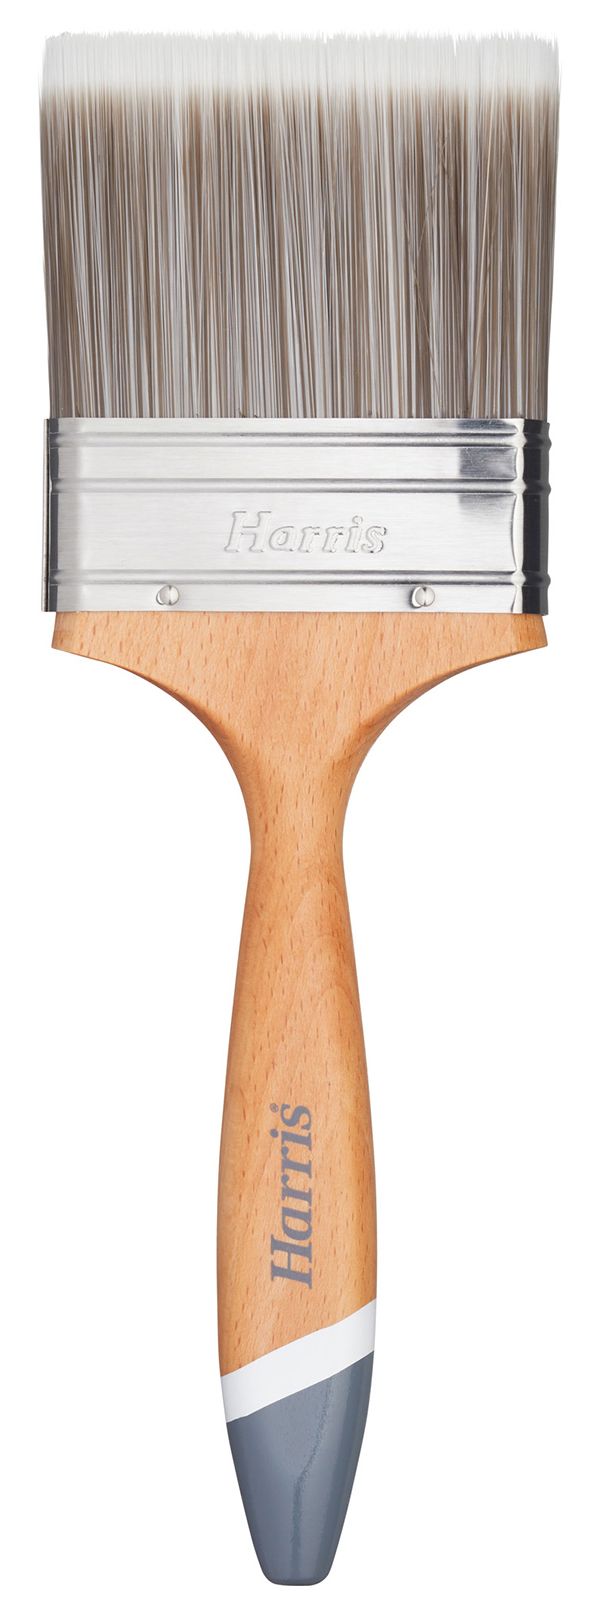 Image of Harris Ultimate Wall & Ceiling Paint Brush - 3in